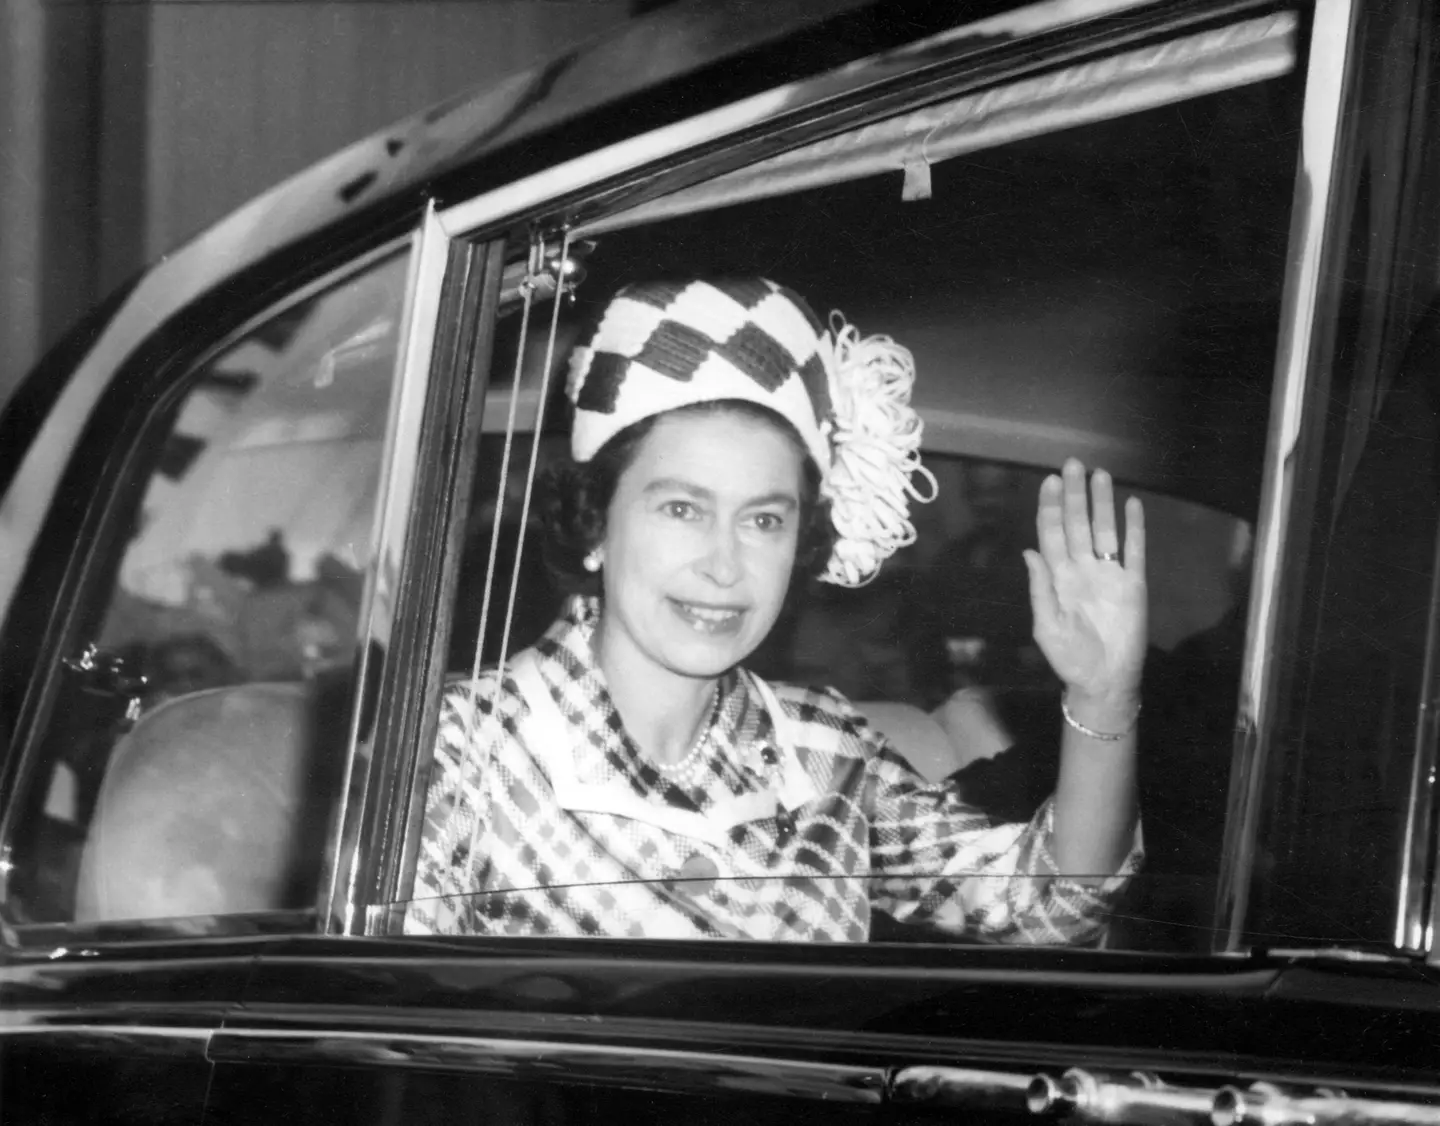 The Queen was a regular visited Australia during her reign including this trip in 1970.